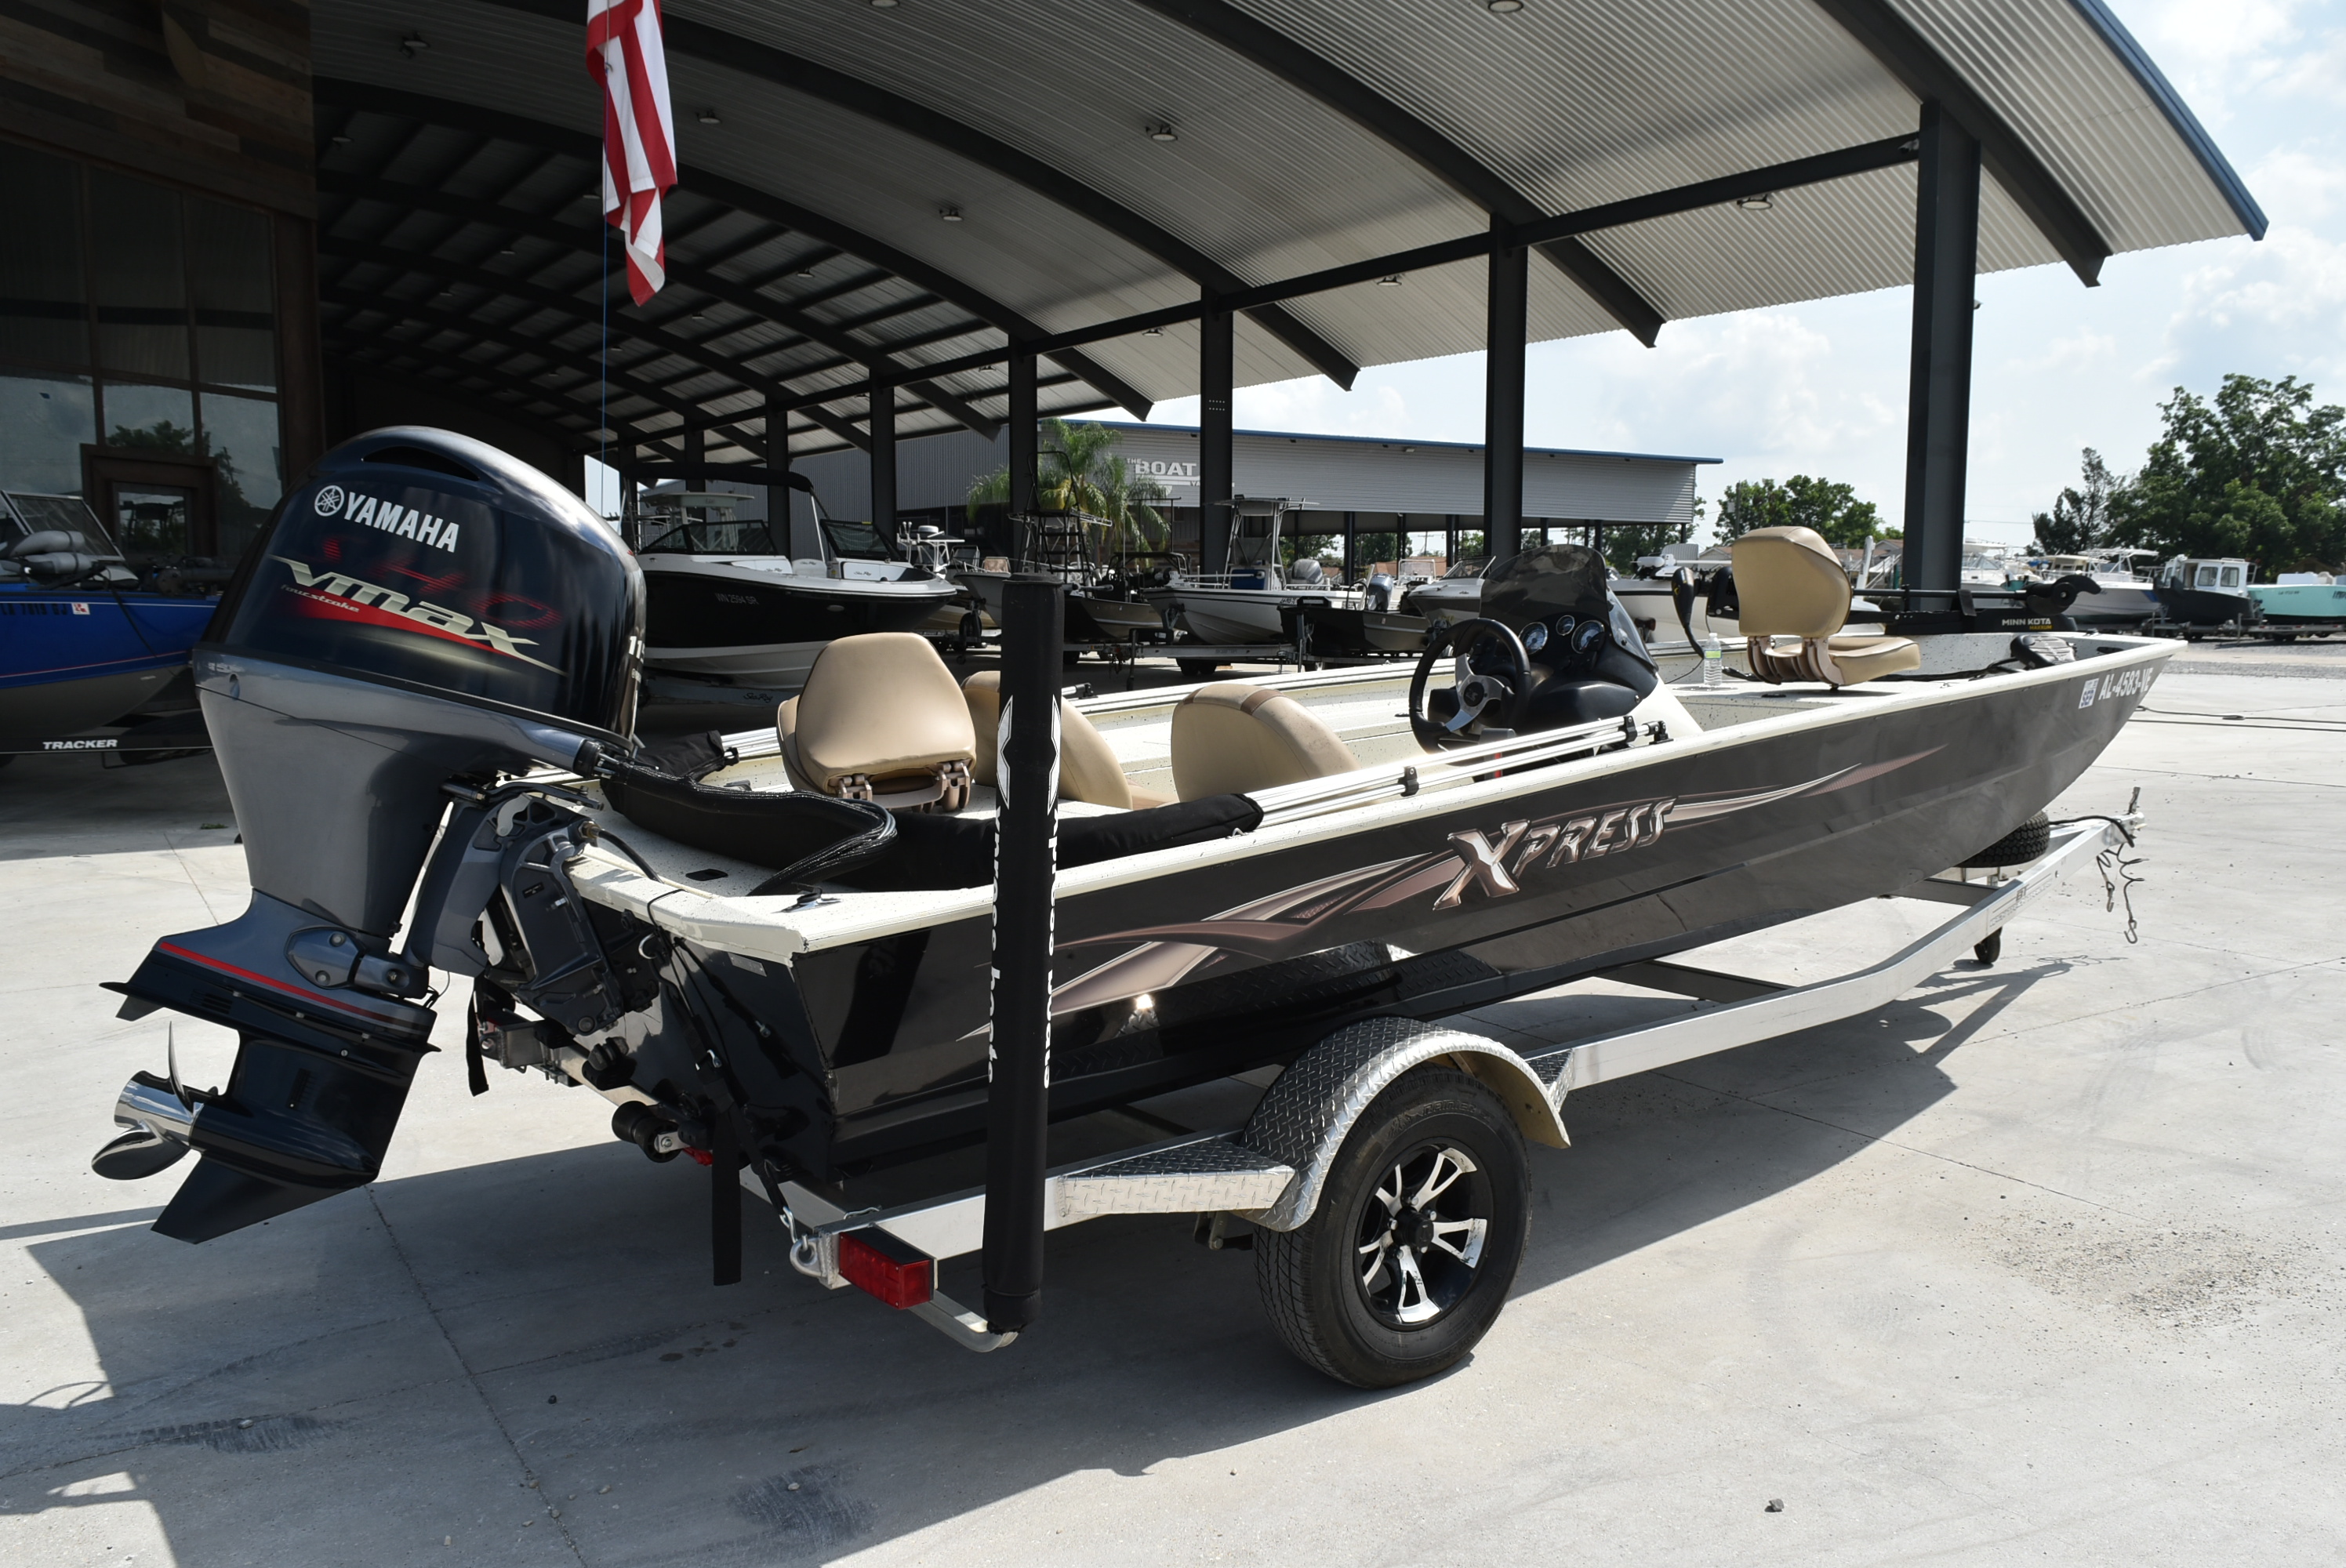 2020 Xpress boat for sale, model of the boat is 200Xp & Image # 7 of 8